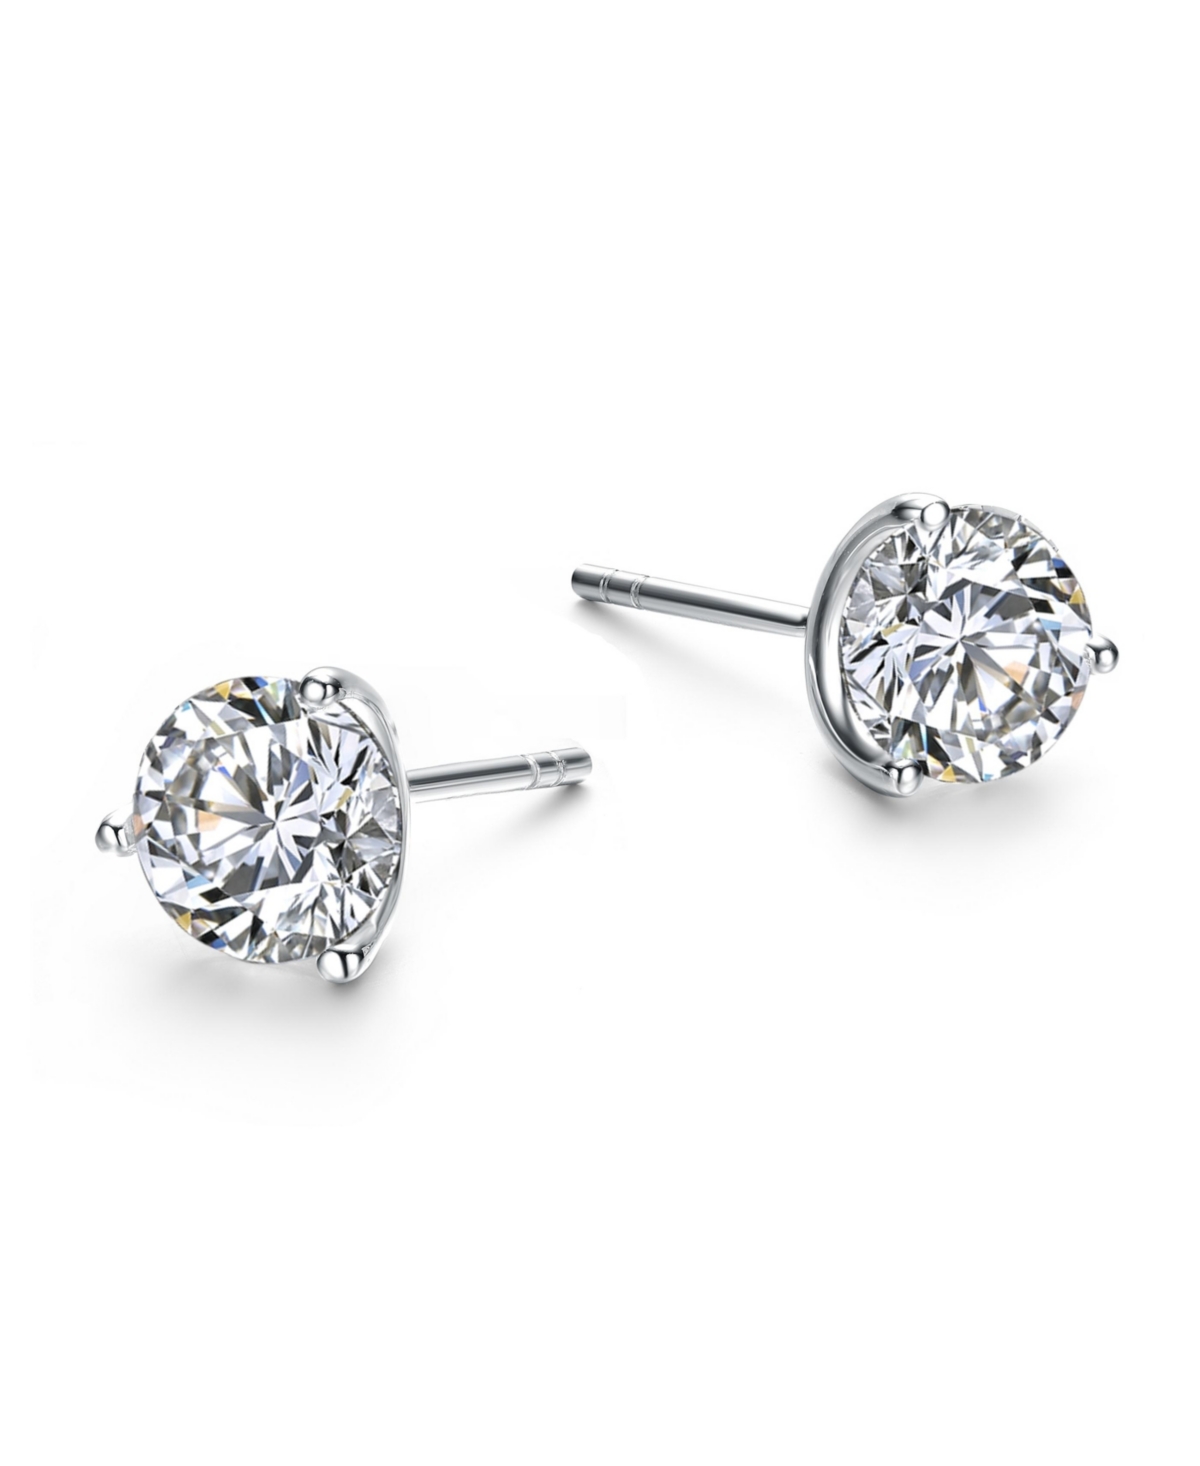 RACHEL GLAUBER WHITE GOLD PLATED 3-PRONG MARTINI SOLITAIRE STUD EARRINGS